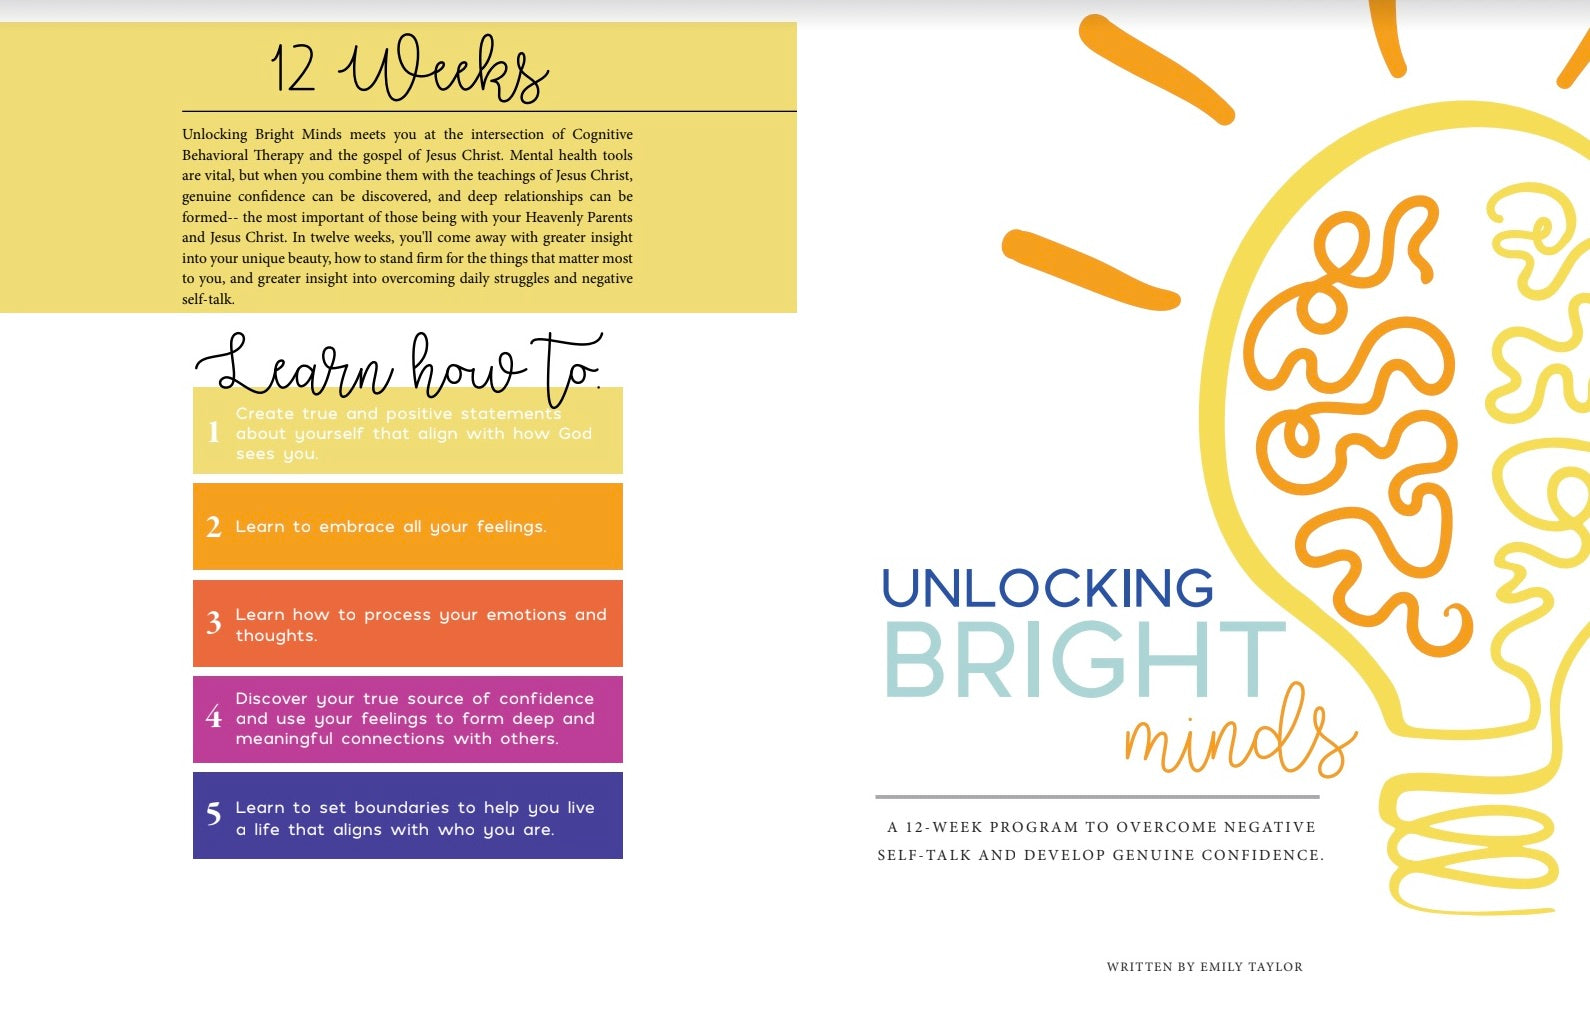 Unlocking Bright Minds: A 12-week program to overcome negative self-talk and develop genuine confidence.